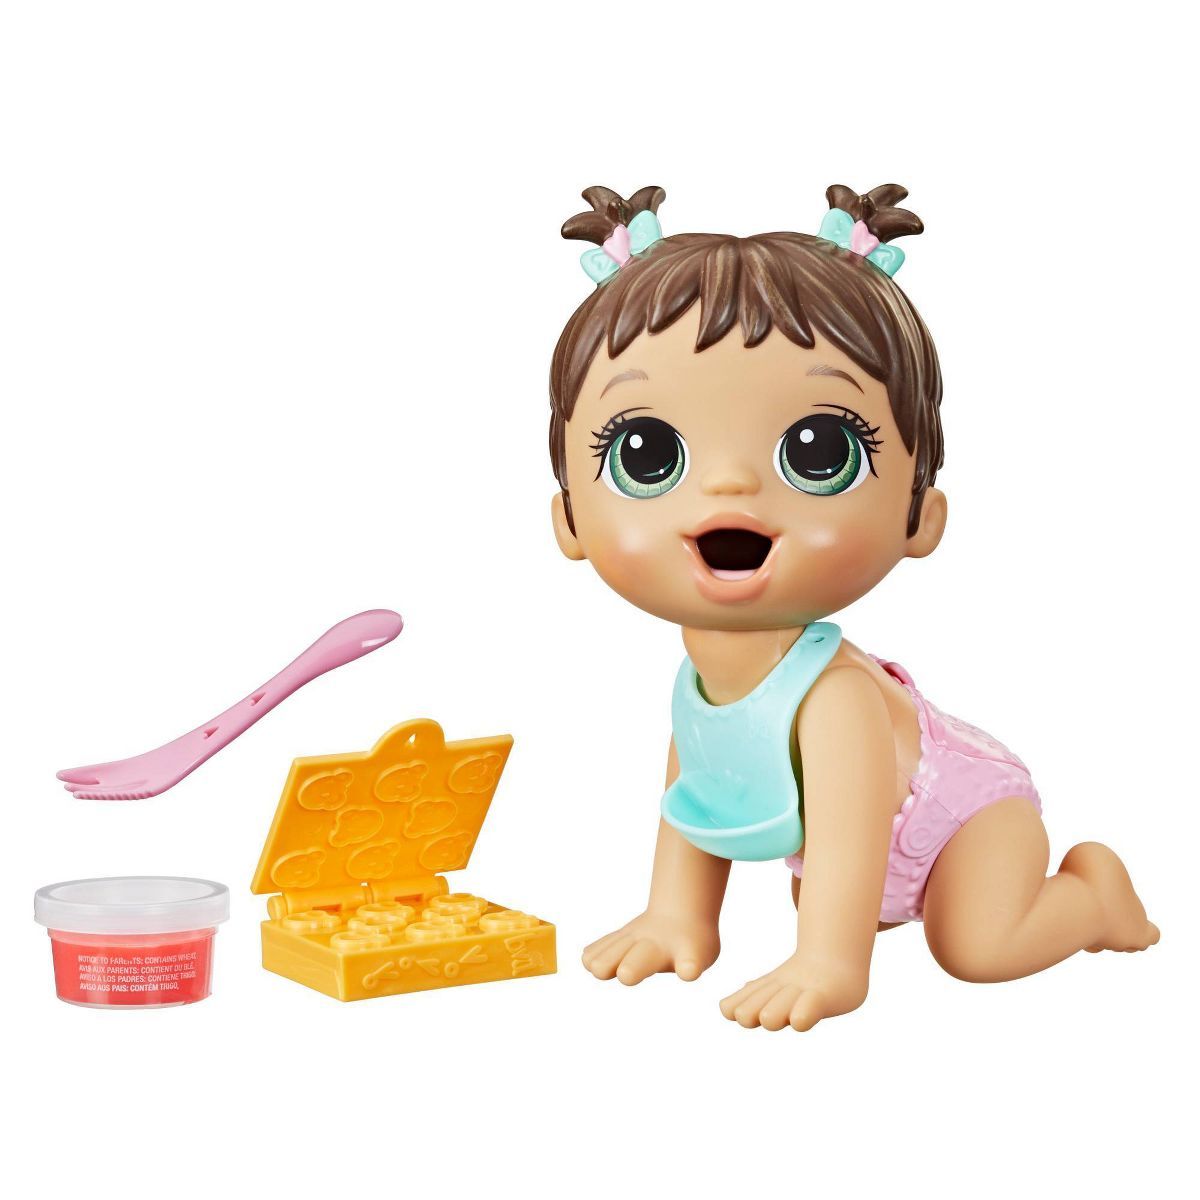 Baby Alive Lil Snacks Baby Doll - Brown Hair | Target